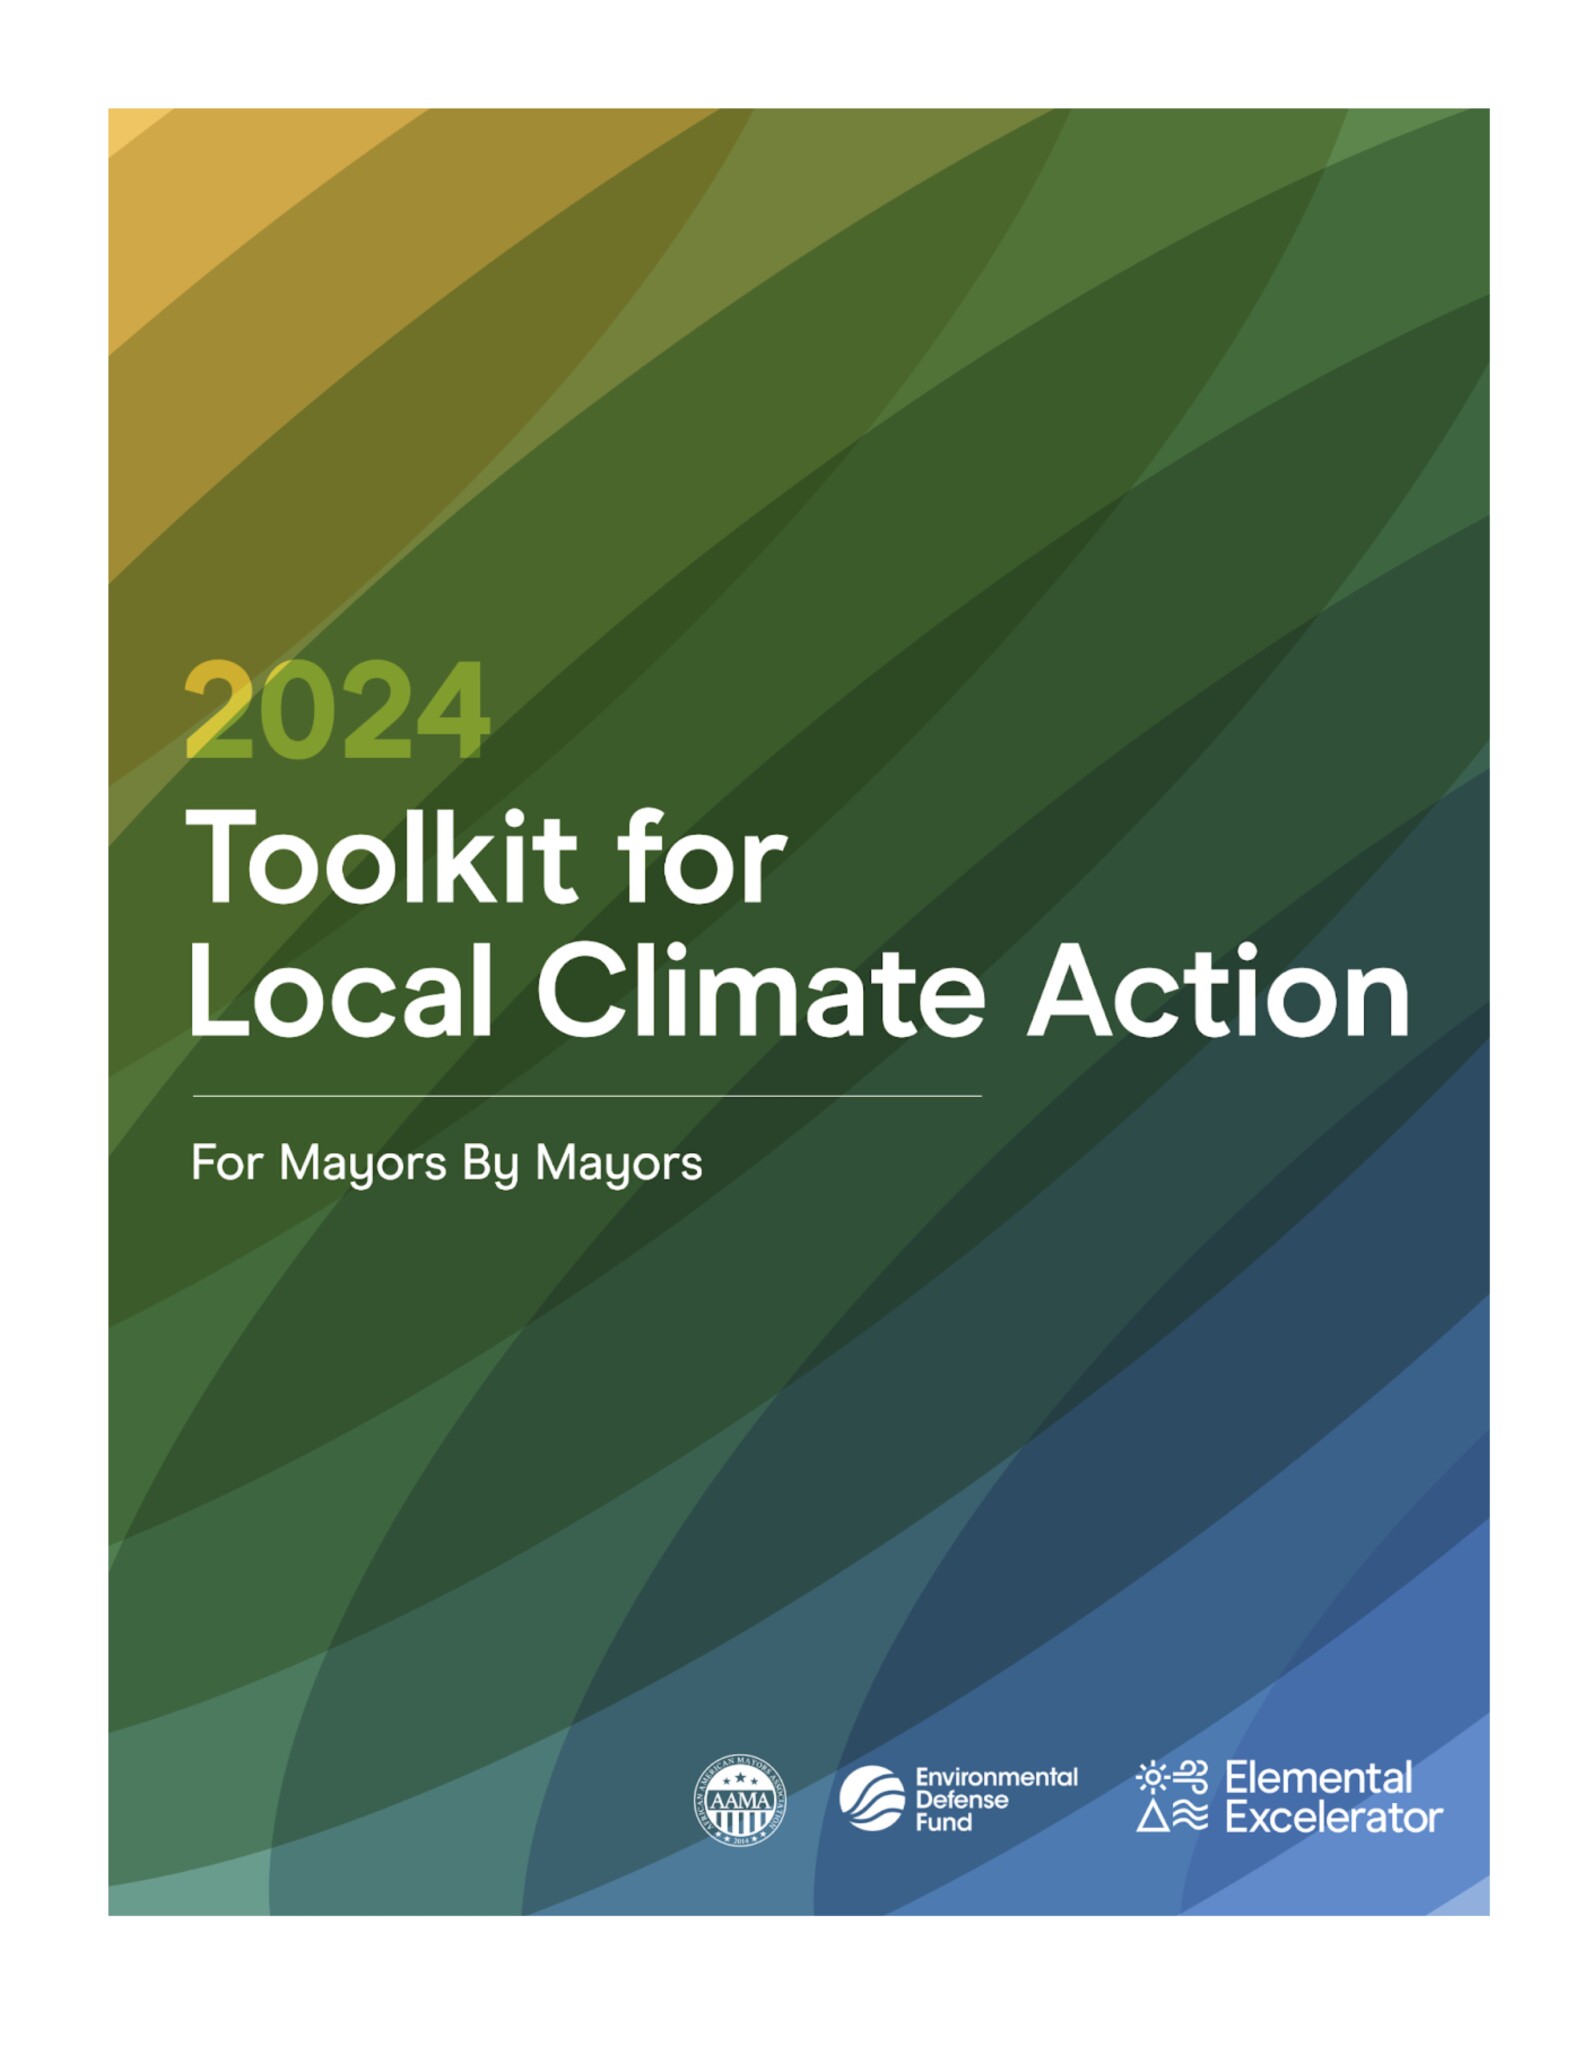 Dowload the Local Climate Action Toolkit 